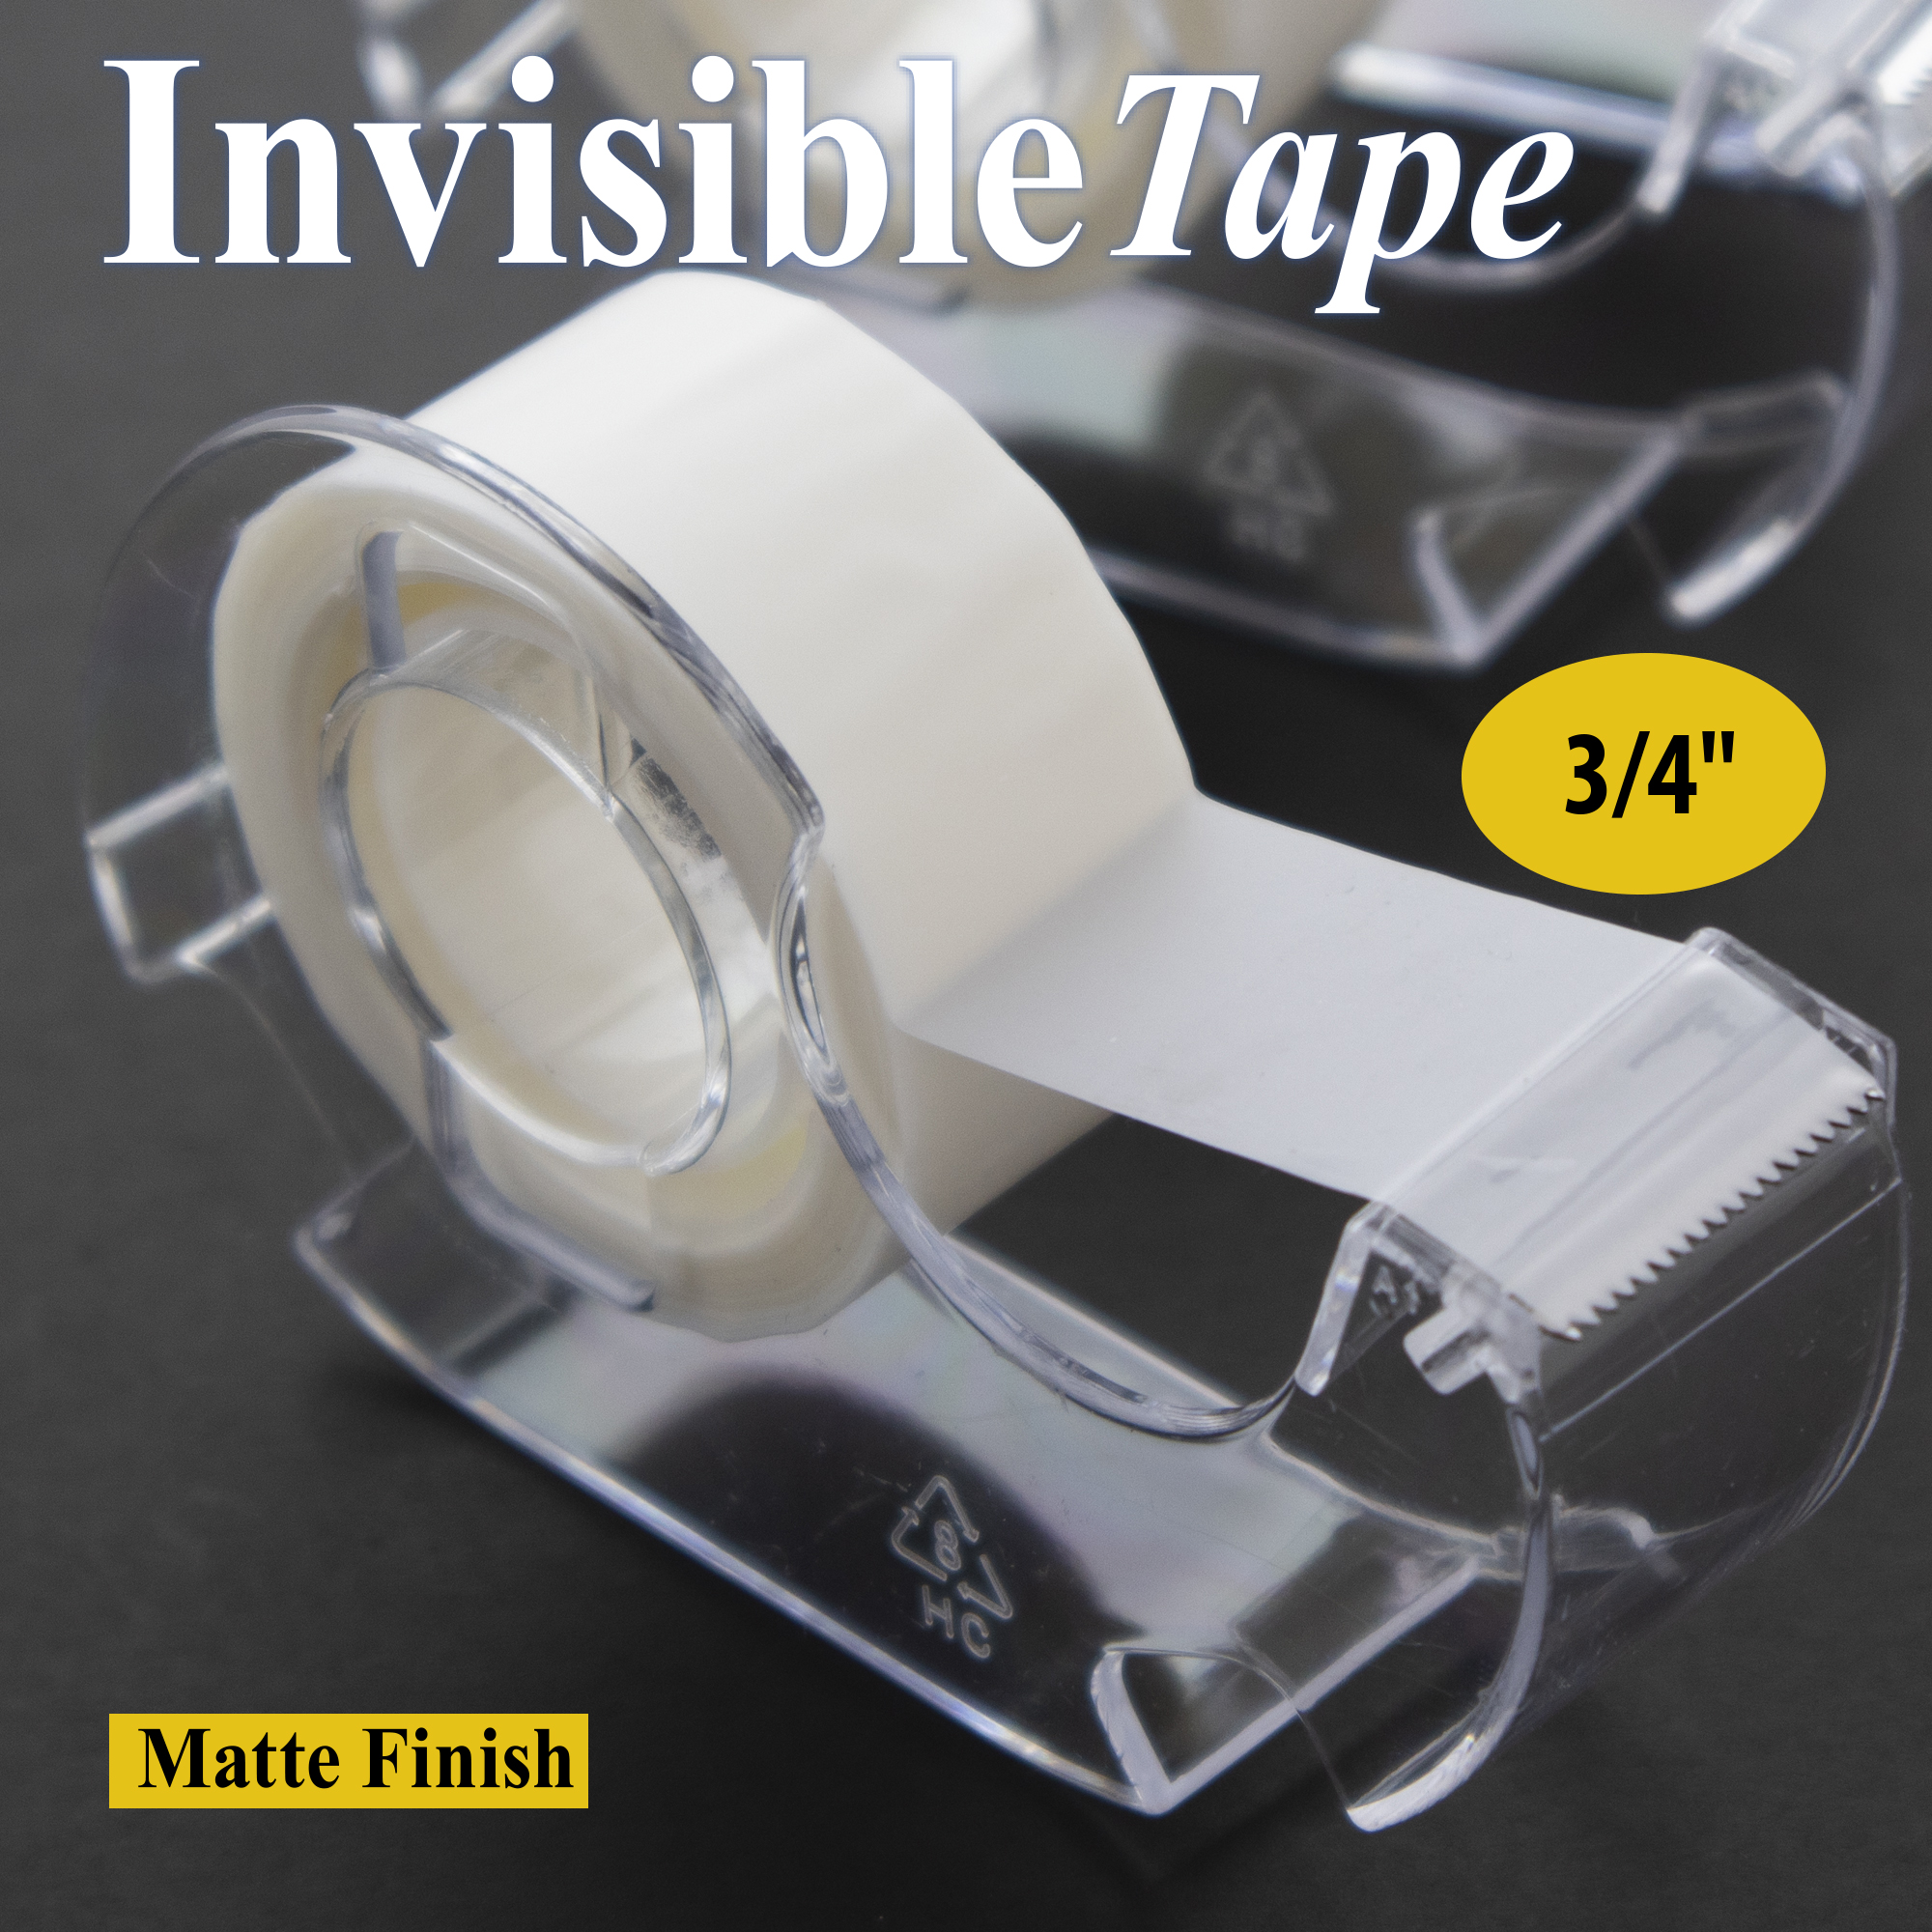 Staples® Invisible Tape, 3/4 x 1,296, 12/Pack (52380P12)